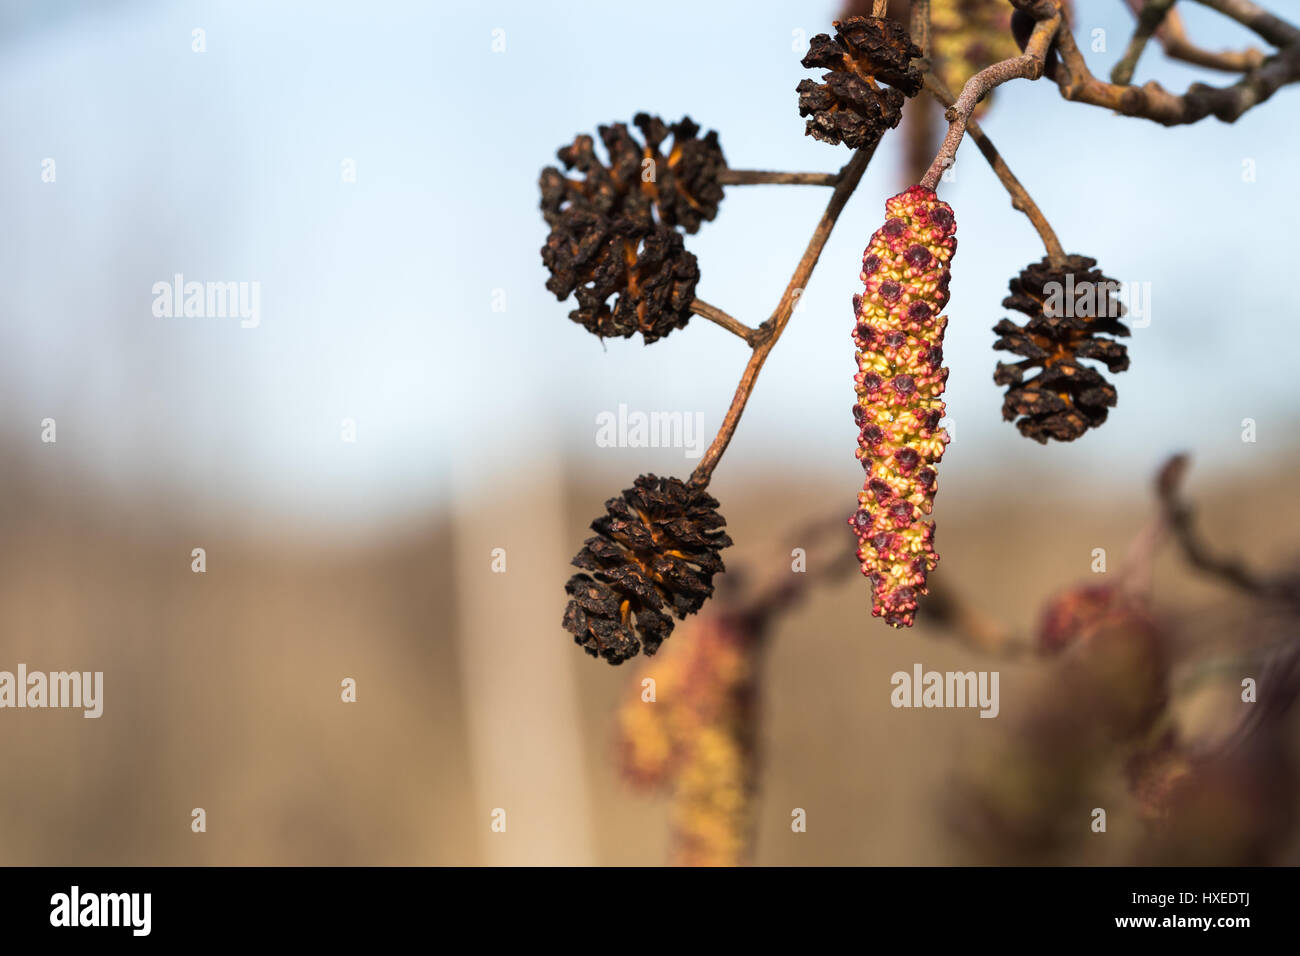 Closeup of hanging alder tree cones and catkin Stock Photo